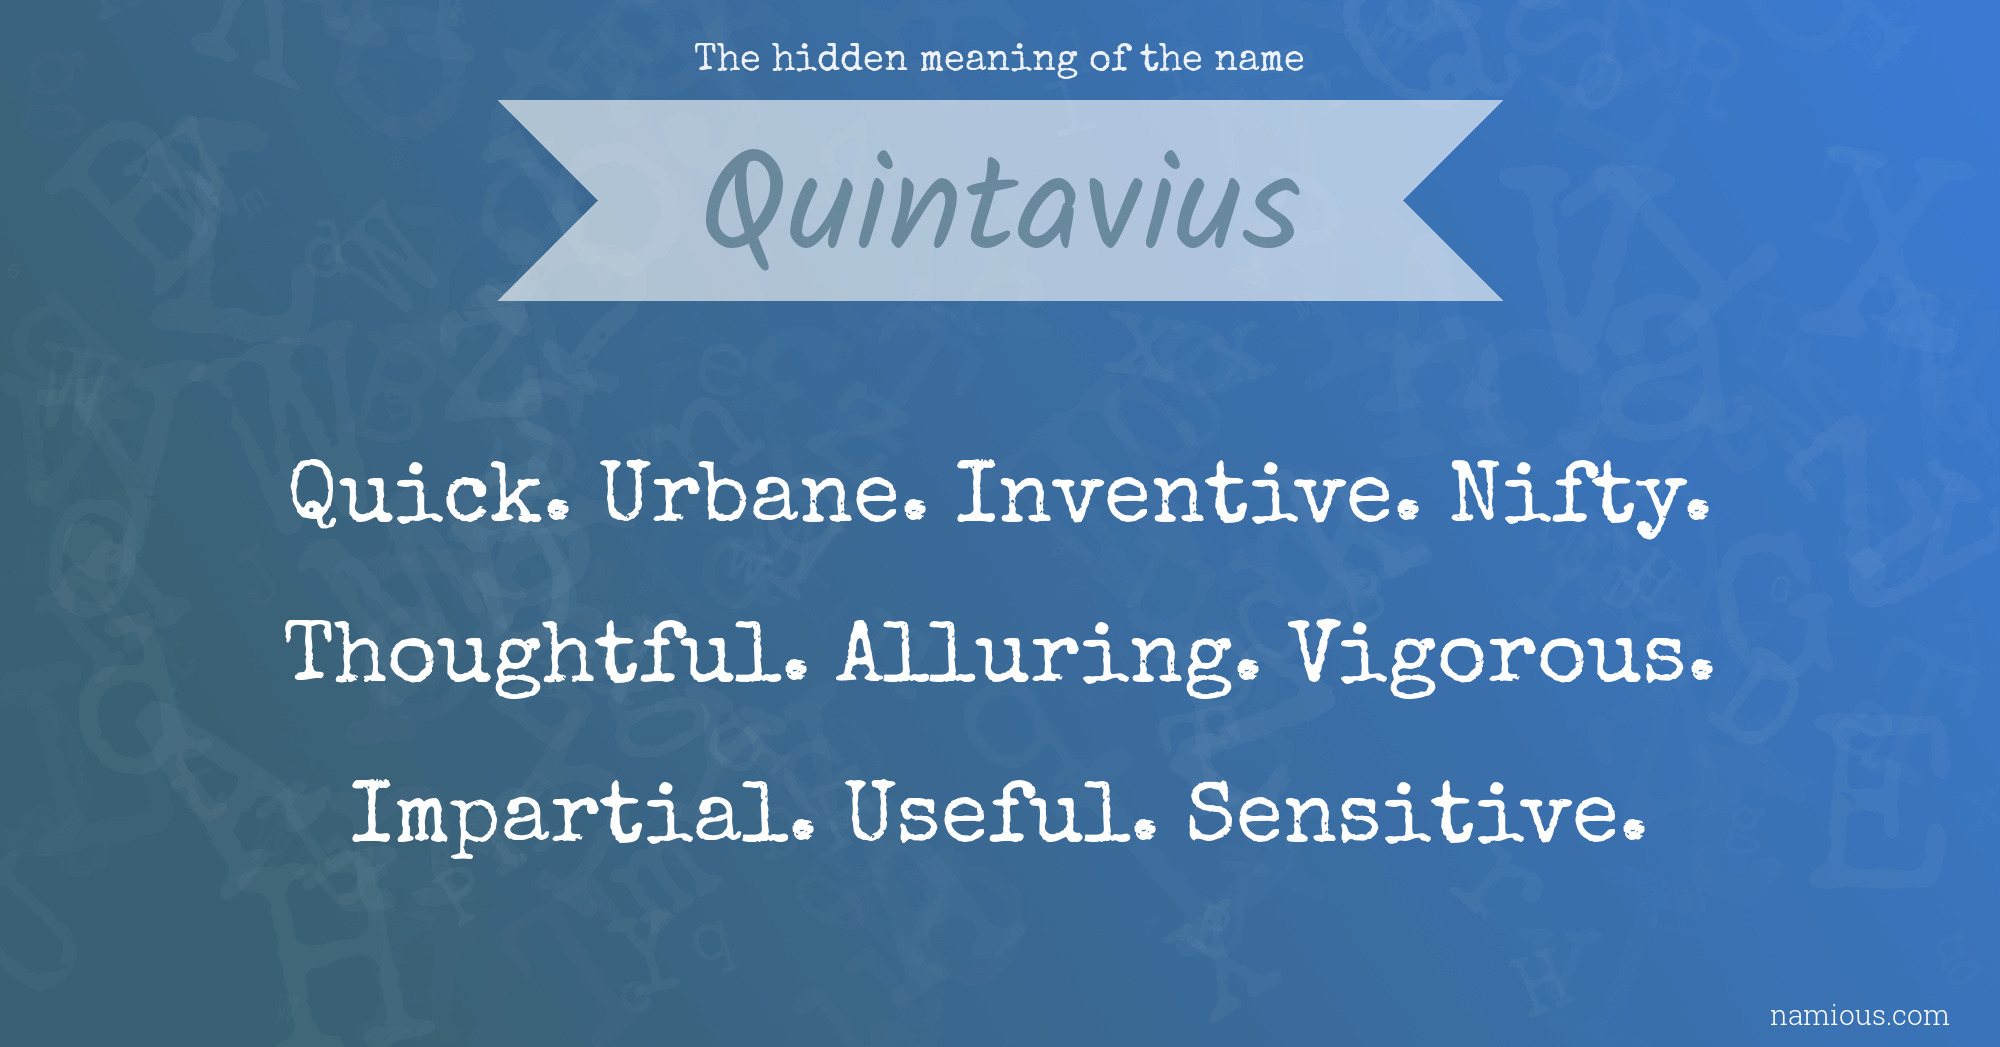 The hidden meaning of the name Quintavius